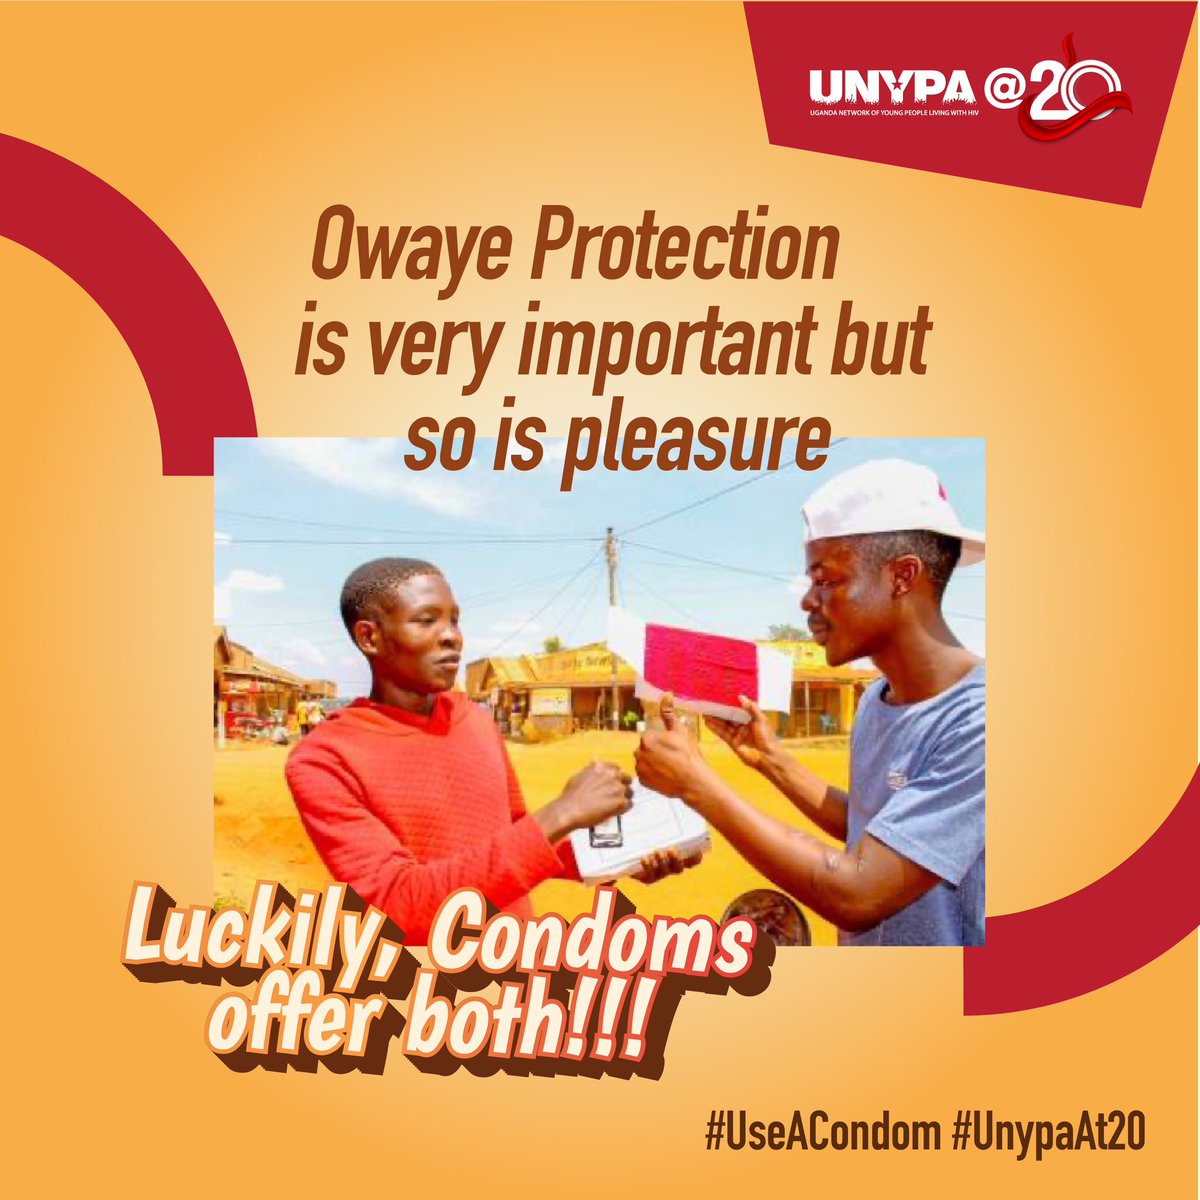 Get your mind right!!

Condoms are a 'barrier' method of contraception that will protect you against HIV/STDs and unintended pregnancy 🤰.

#UseACondom #UnypaAt20